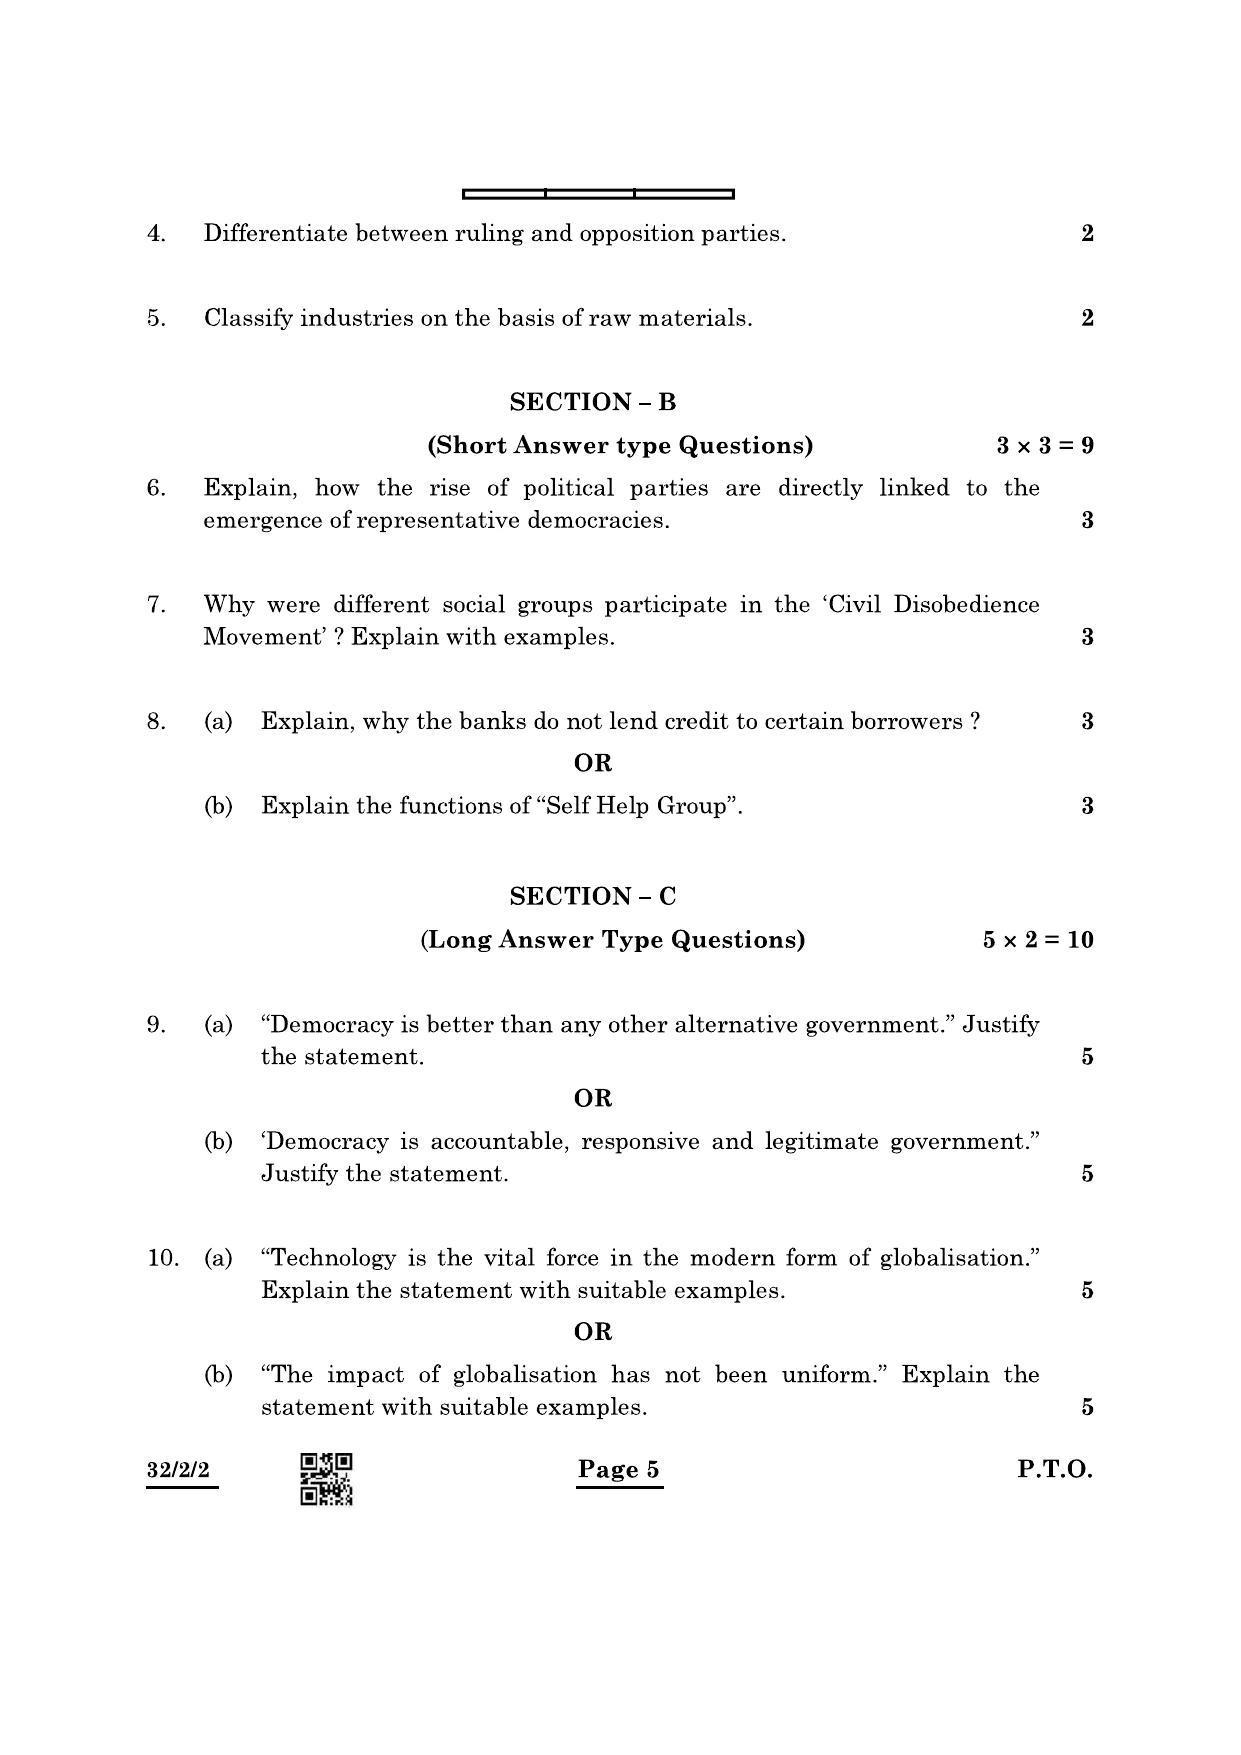 CBSE Class 10 32-2-2 Social Science 2022 Question Paper - Page 5